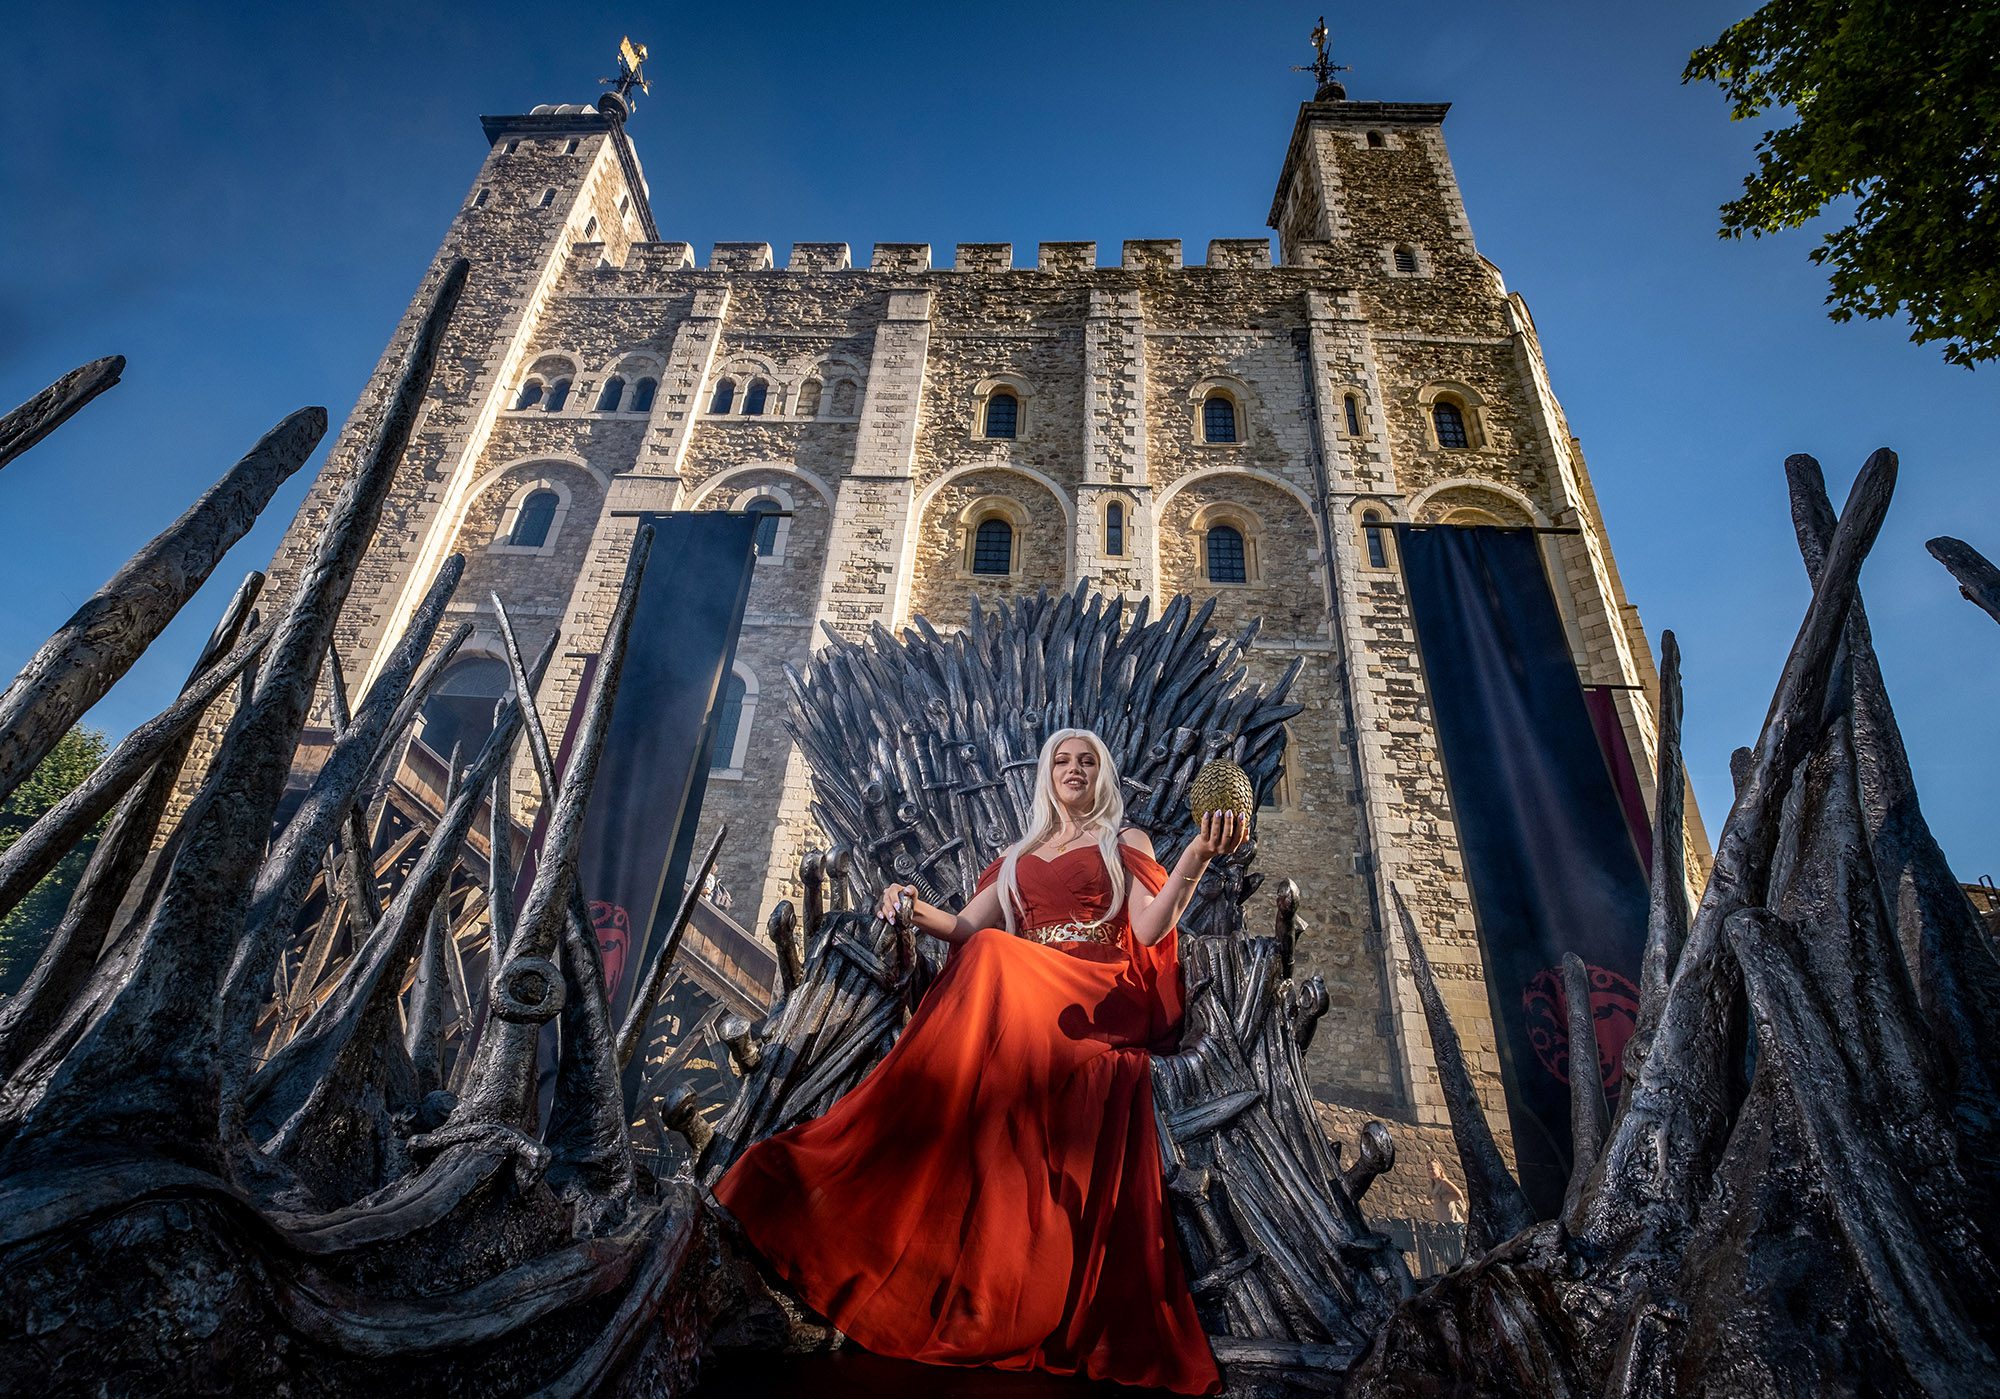 Cosplayer and superfan Sophia sits on the Iron Throne outside the Tower of London to mark the launch of the Game of Thrones prequel, House of the Dragon, in London, England, on Monday, August 8, 2022. (SWNS/Zenger)